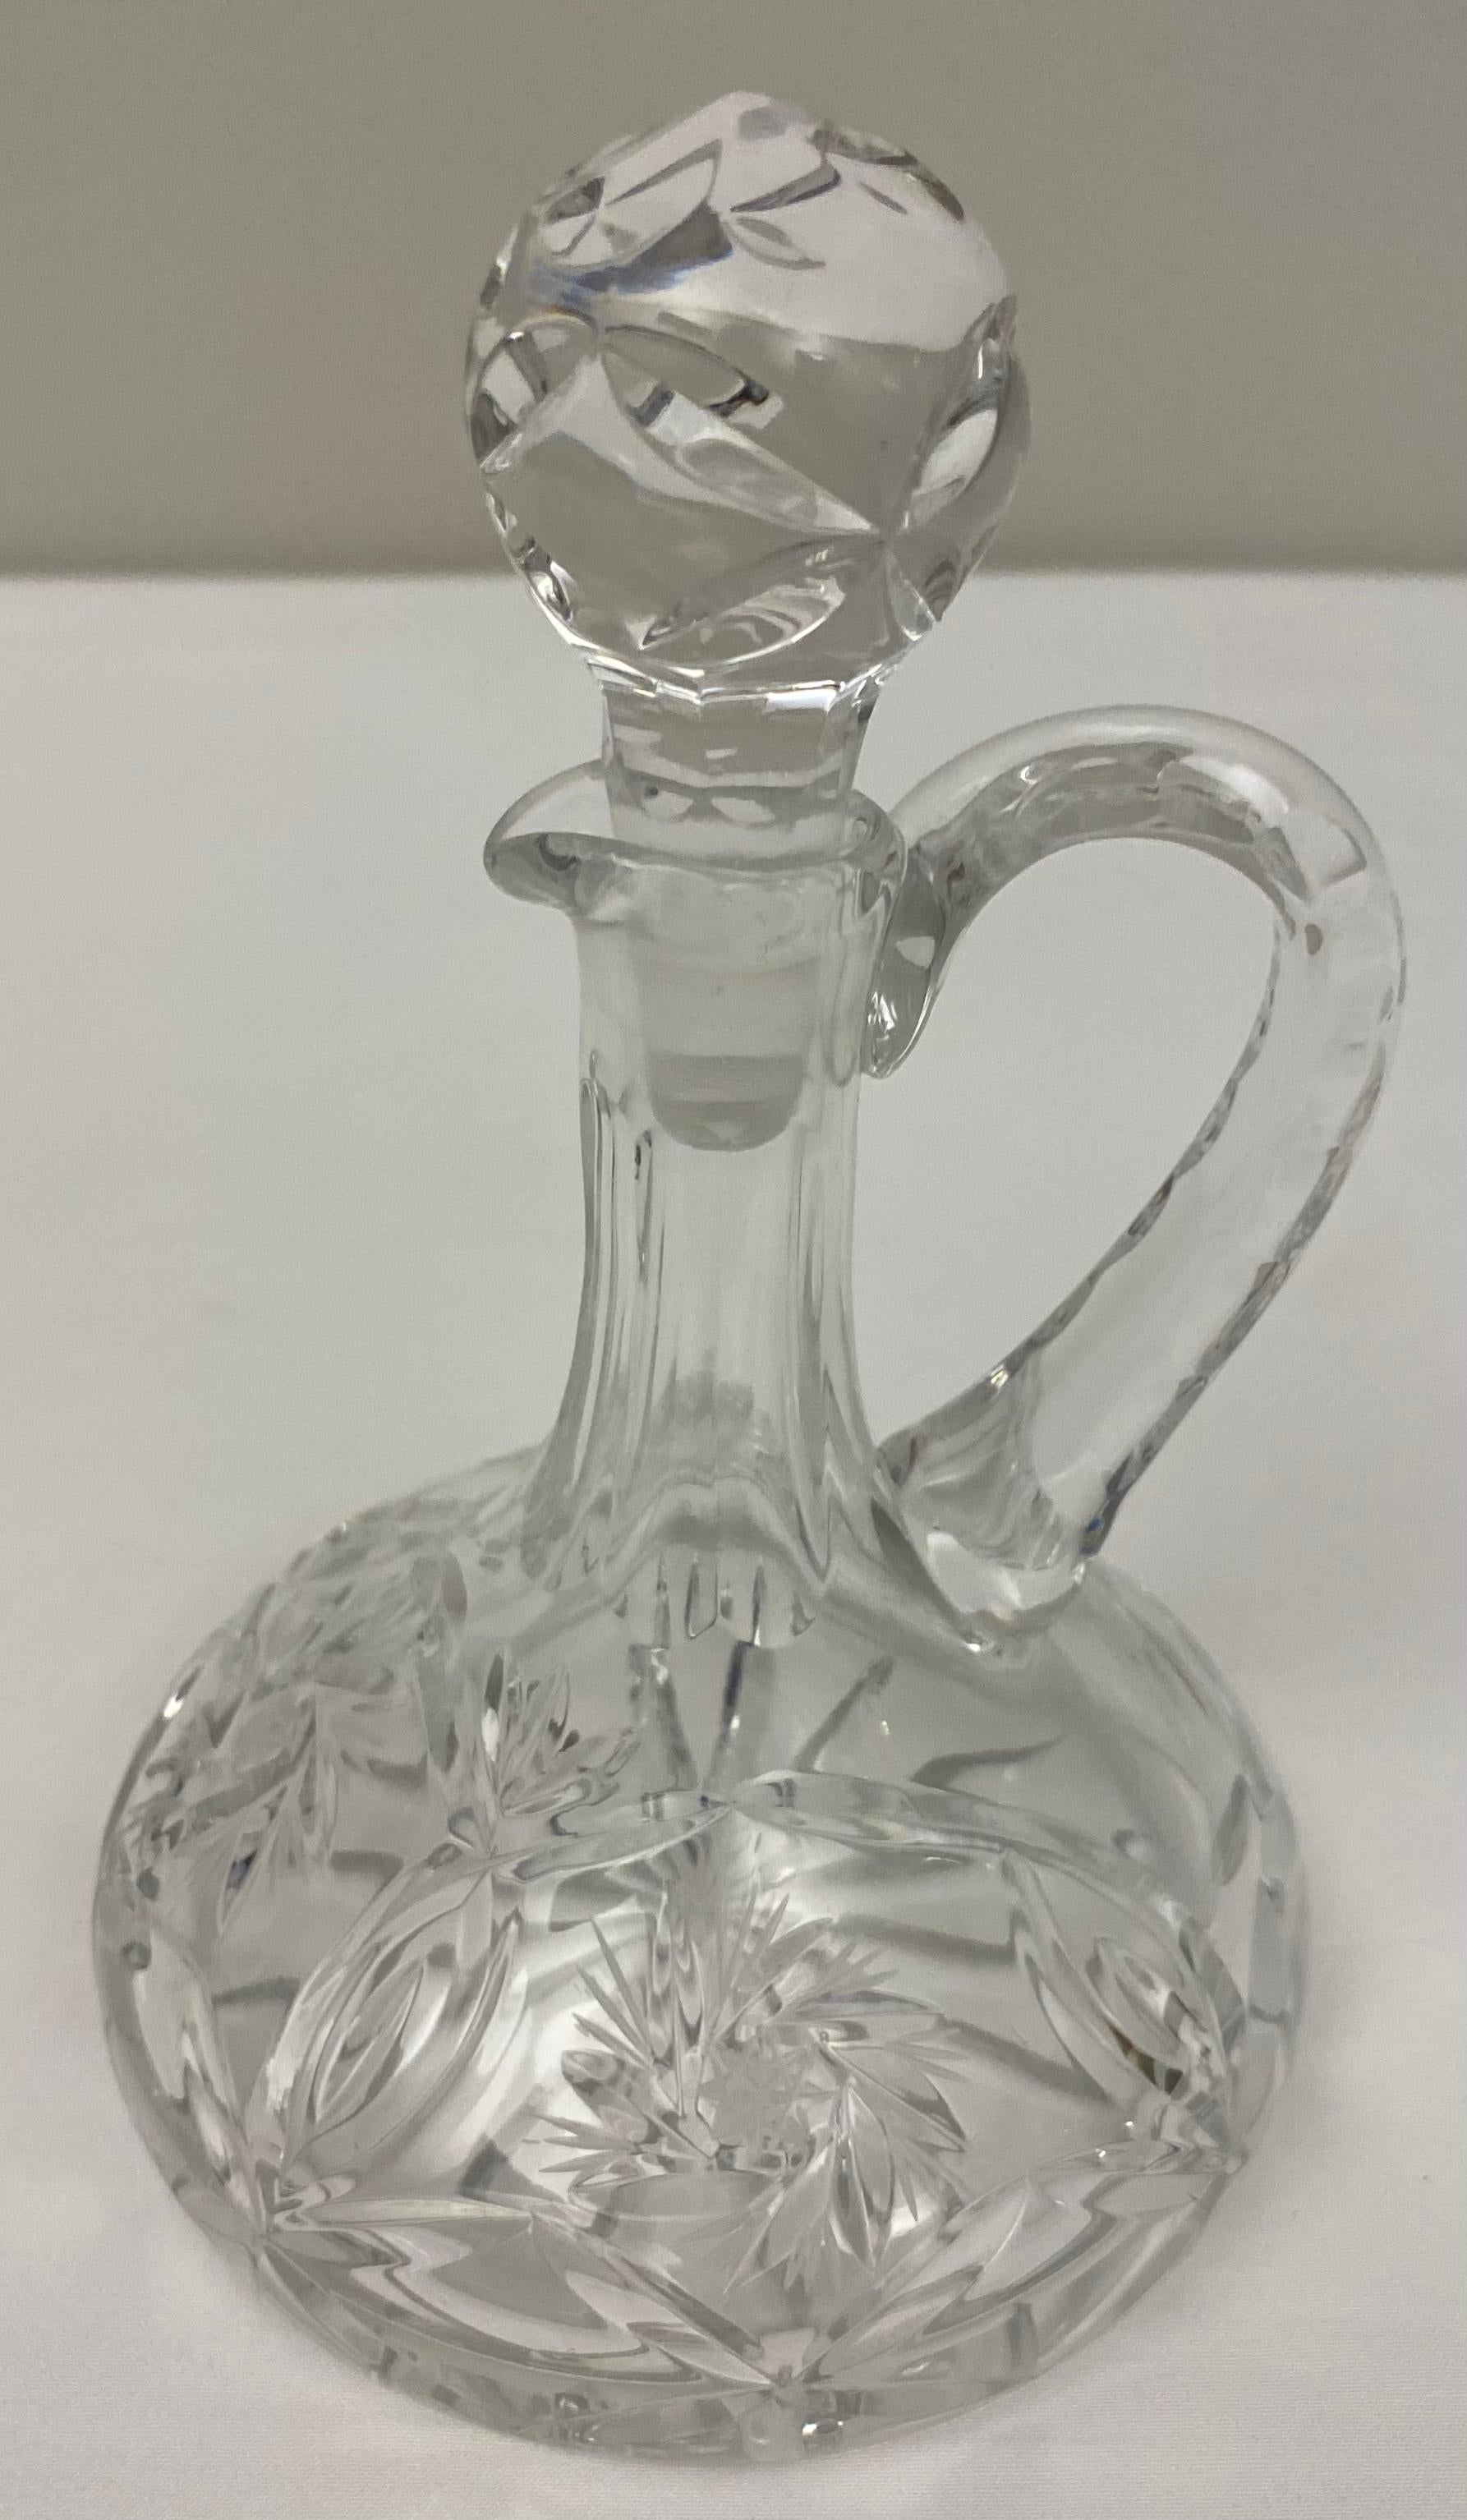 Elegant Early 20th century French Art Deco style crystal oil and vinegar cruets or serving bottles in cut crystal with an etched design. A curved rim around the upper edges of the bottles allows for easier pouring. 

These serving pieces are sure to